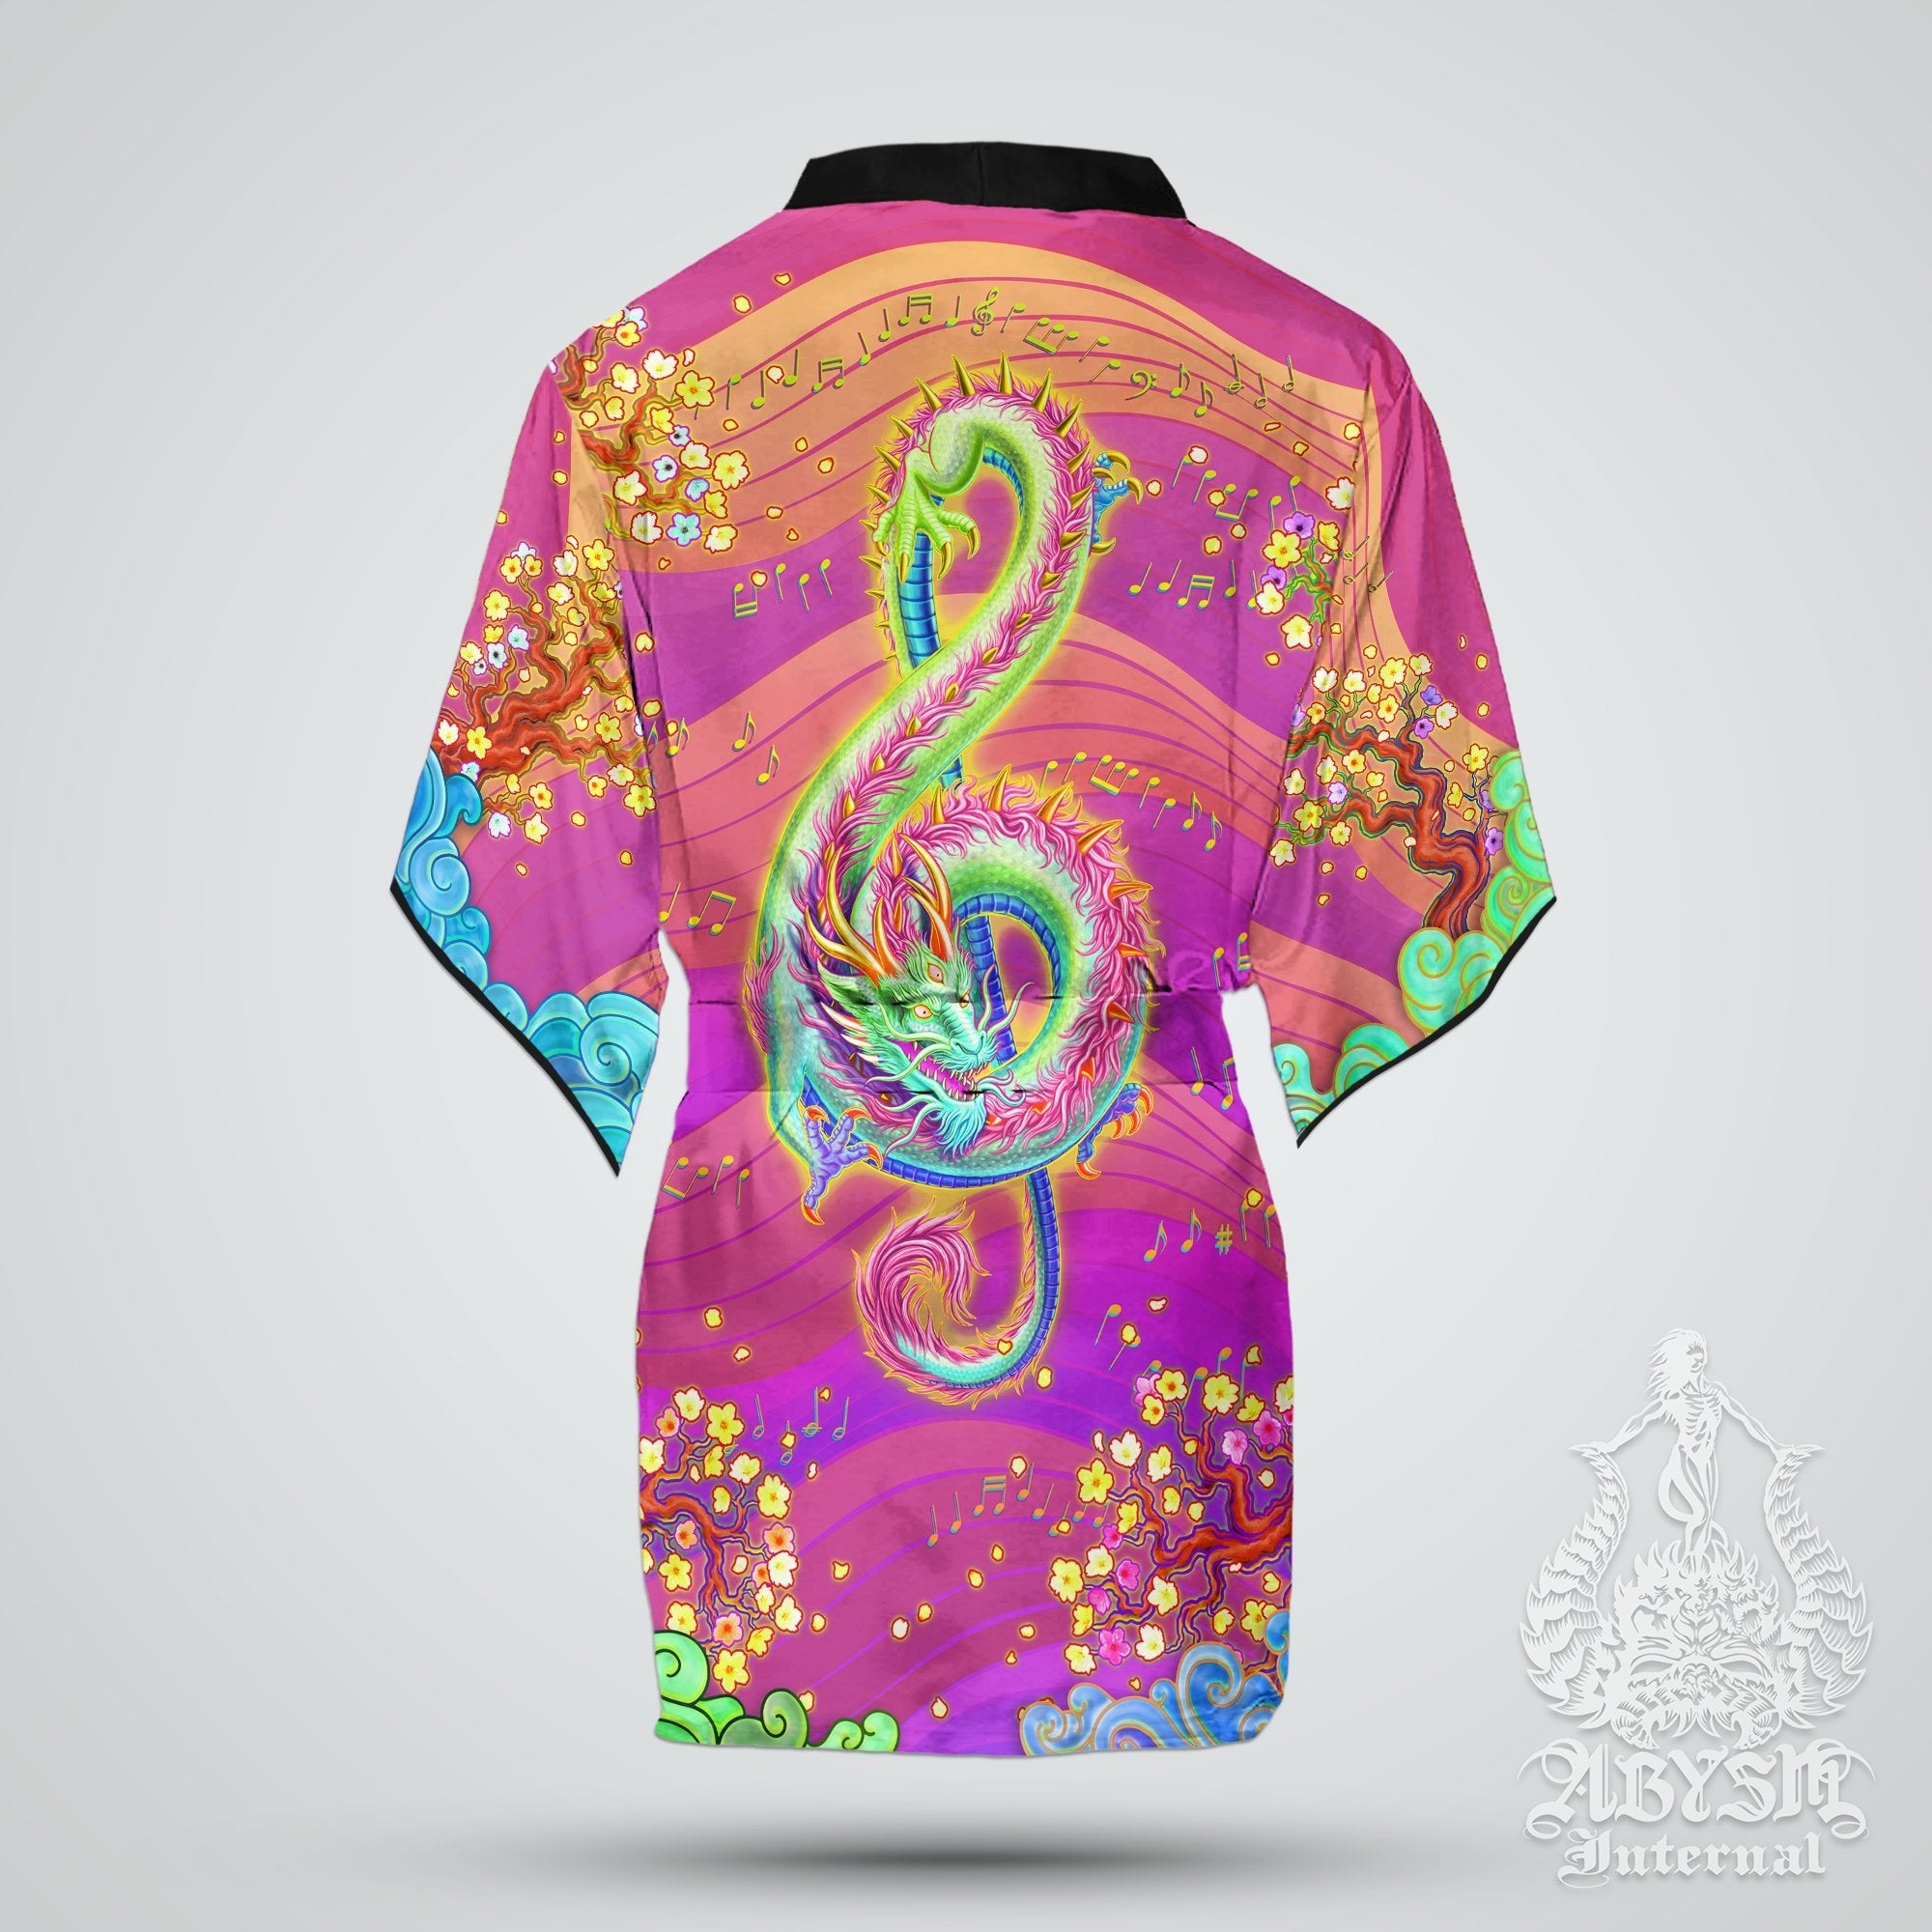 Music Cover Up, Beach Outfit, Party Kimono, Summer Festival Robe, Indie and Alternative Clothing, Unisex - Dragon, Psy Neon - Abysm Internal